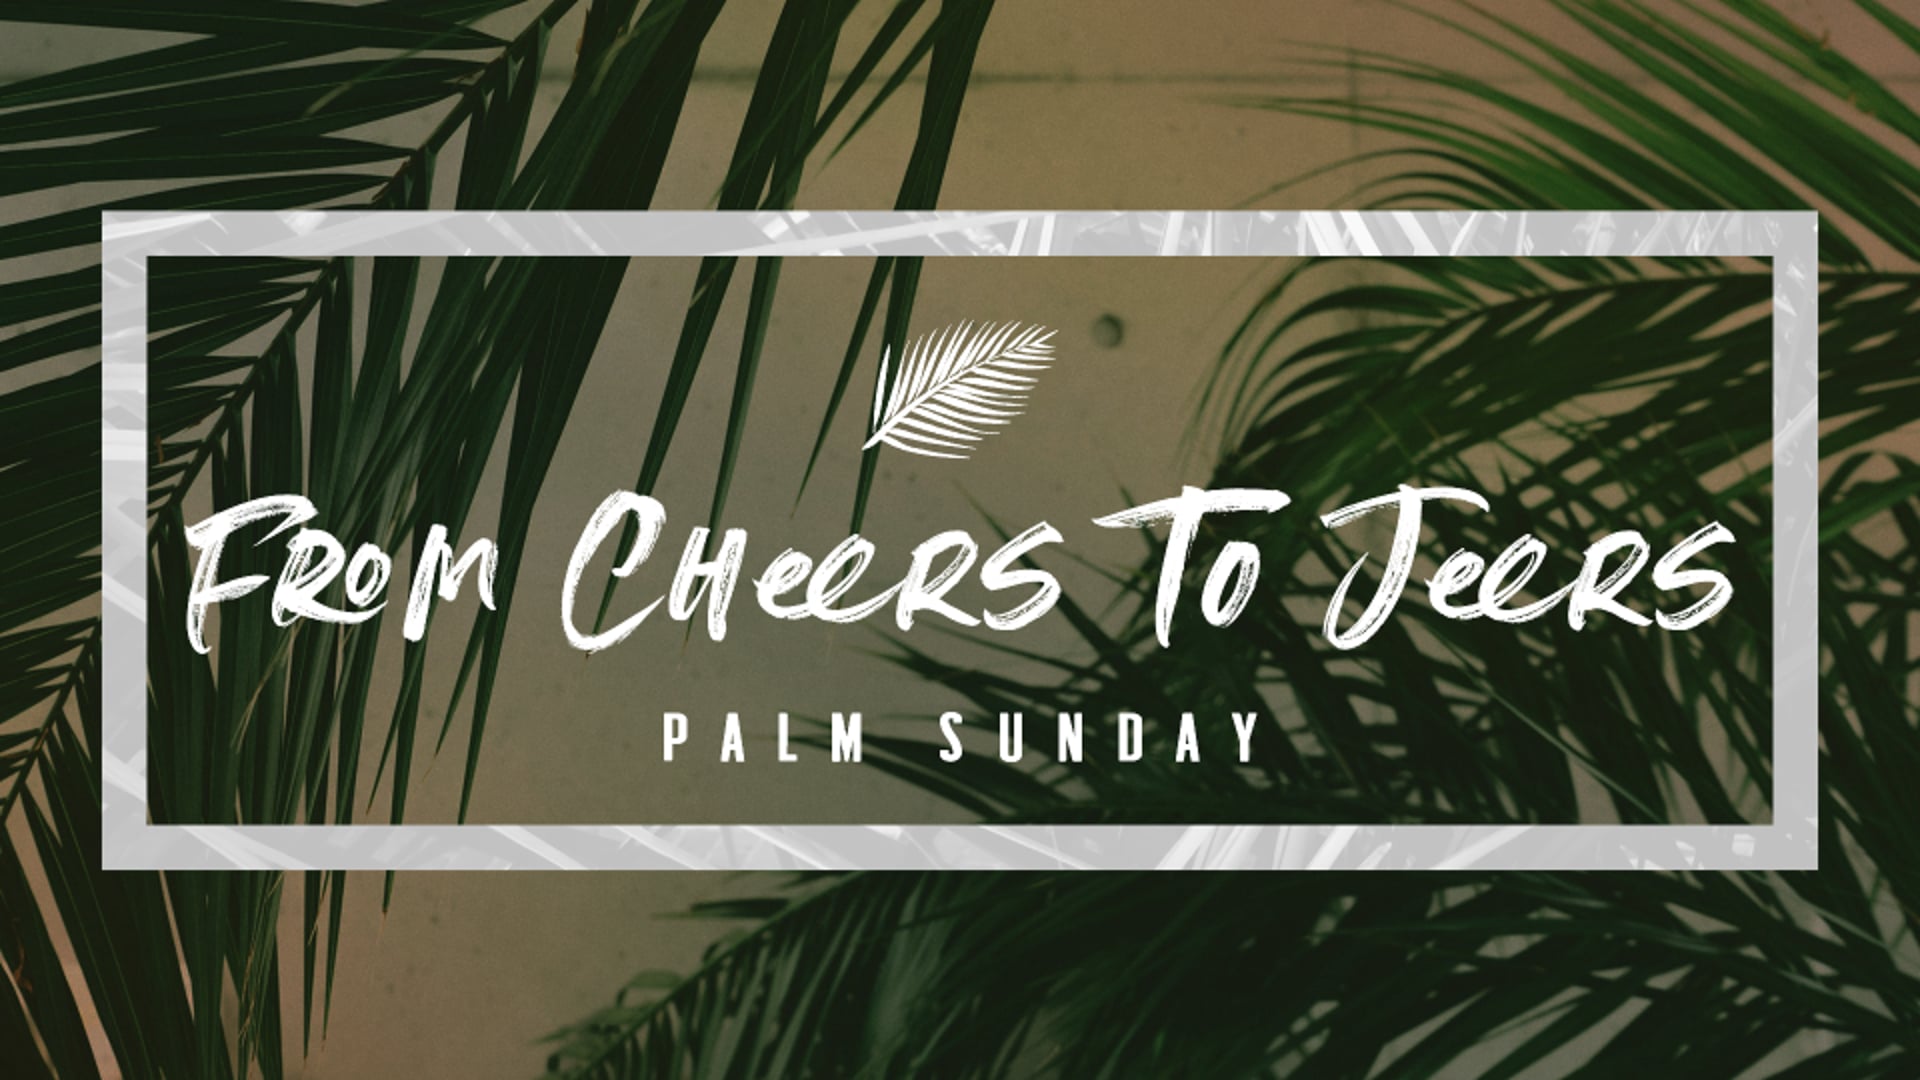 PALM SUNDAY | From Cheers To Jeers